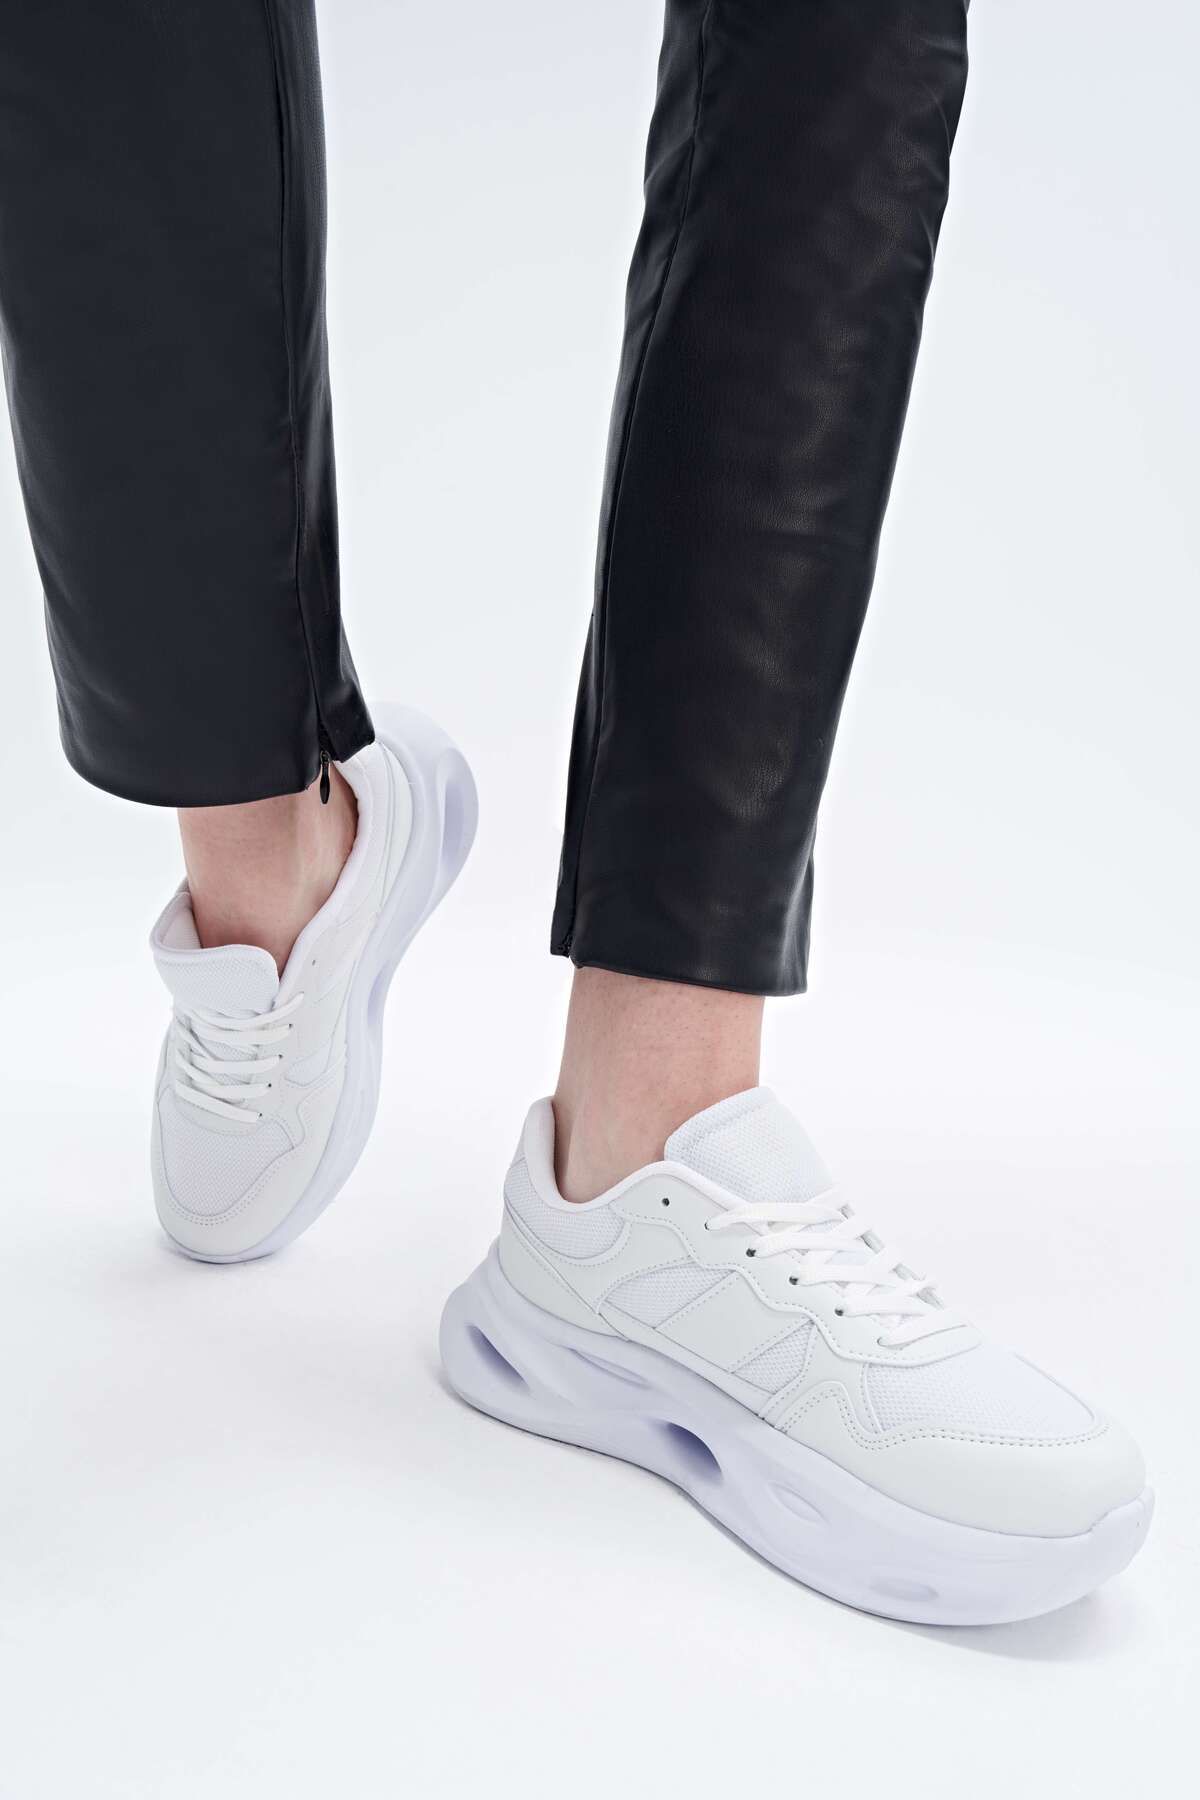 Puma Cali Dream chunky sneakers in white and pink - WHITE | ASOS | Leather sneakers  women, Puma cali, Puma sneakers womens